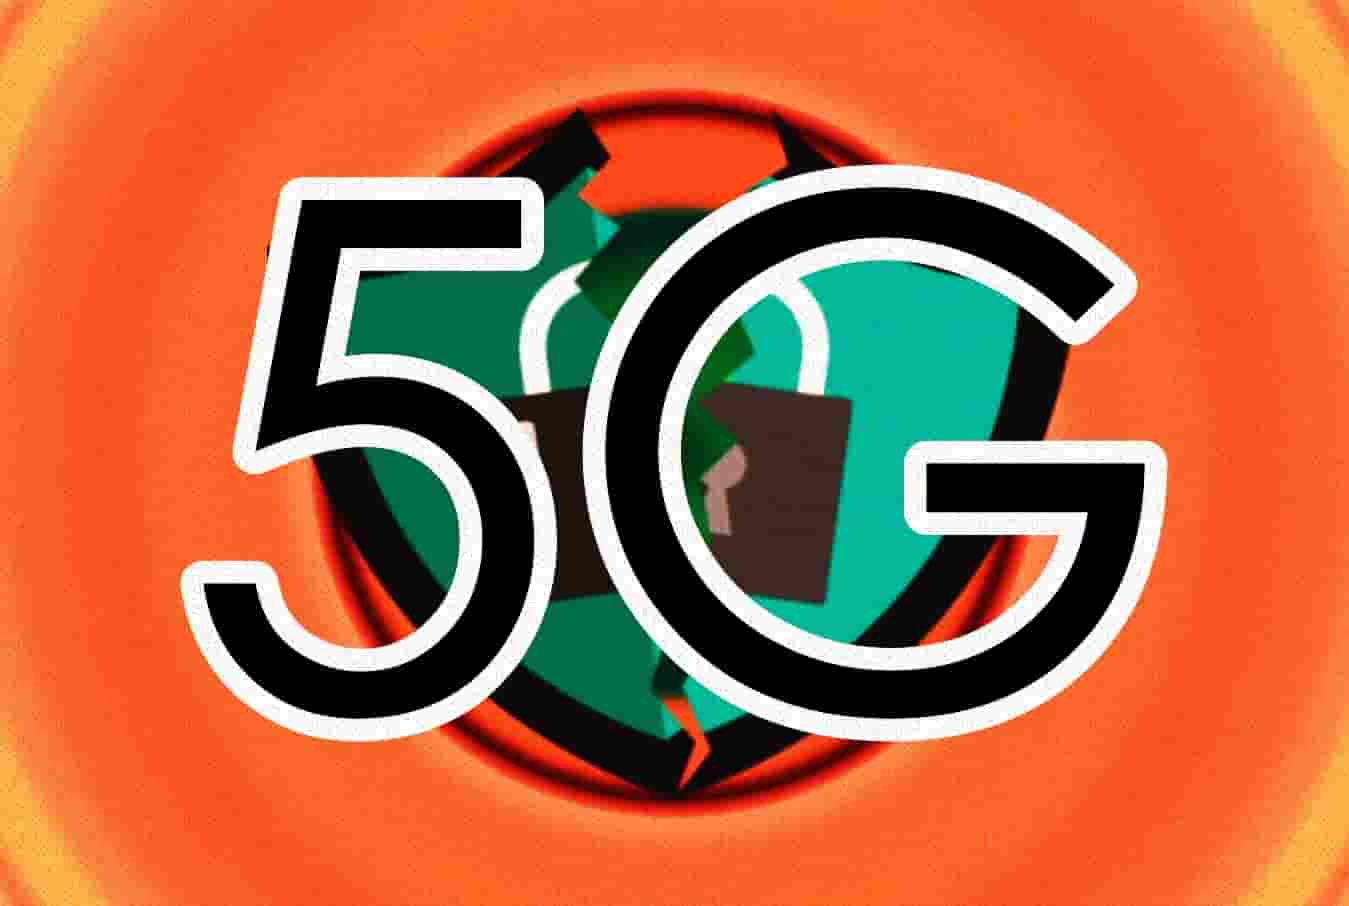 Major vulnerability exposes 5G core network slicing to DoS attacks